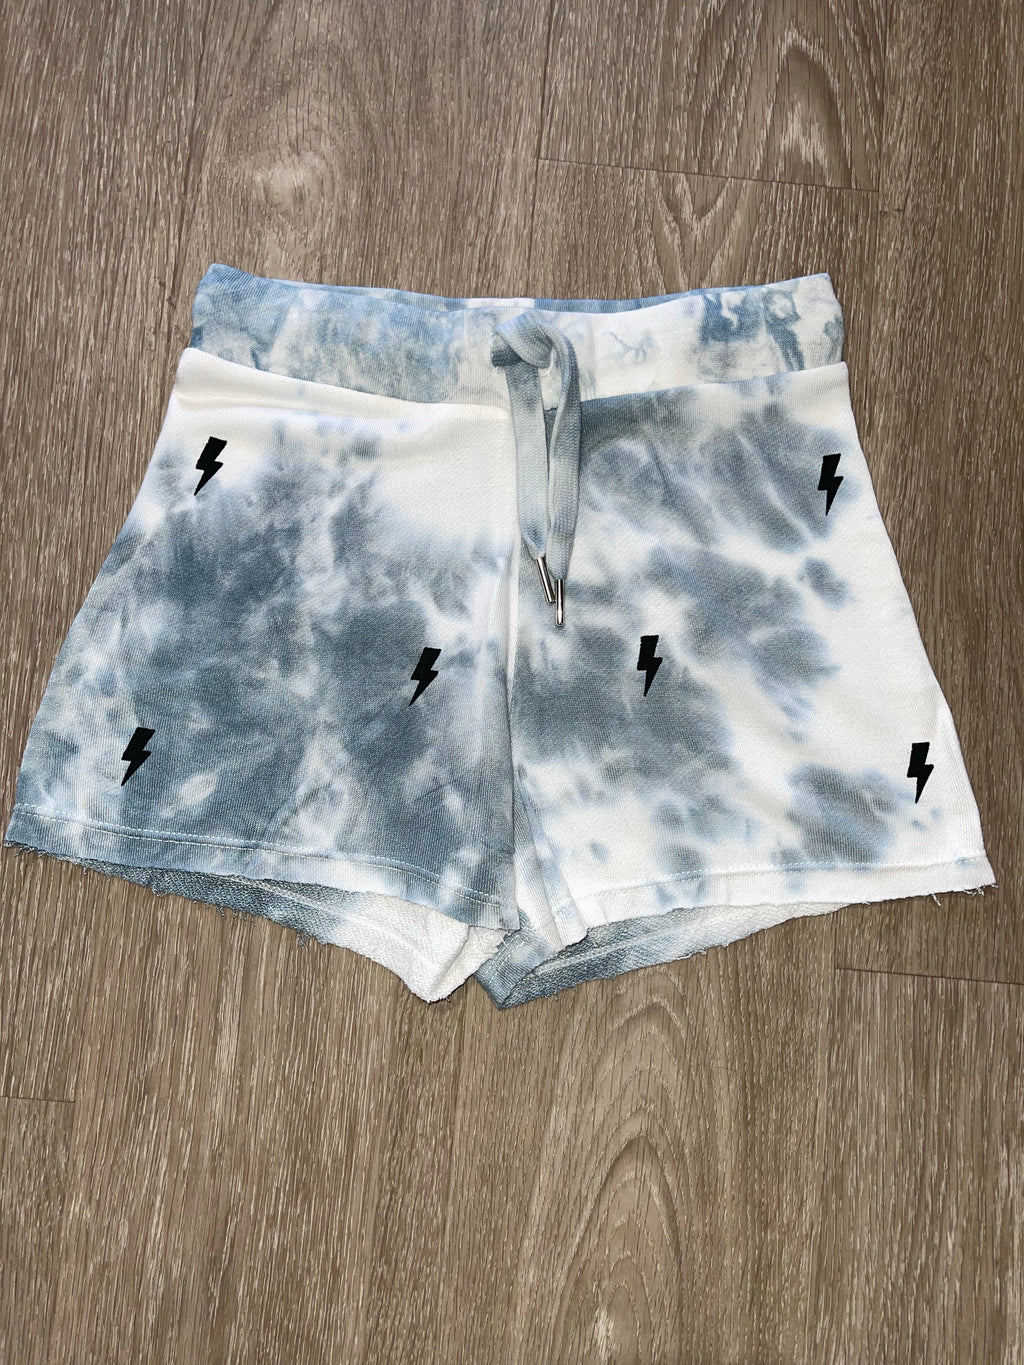 FLOWERS BY ZOE- SHORTS IN OFF WHITE AND GREY TD